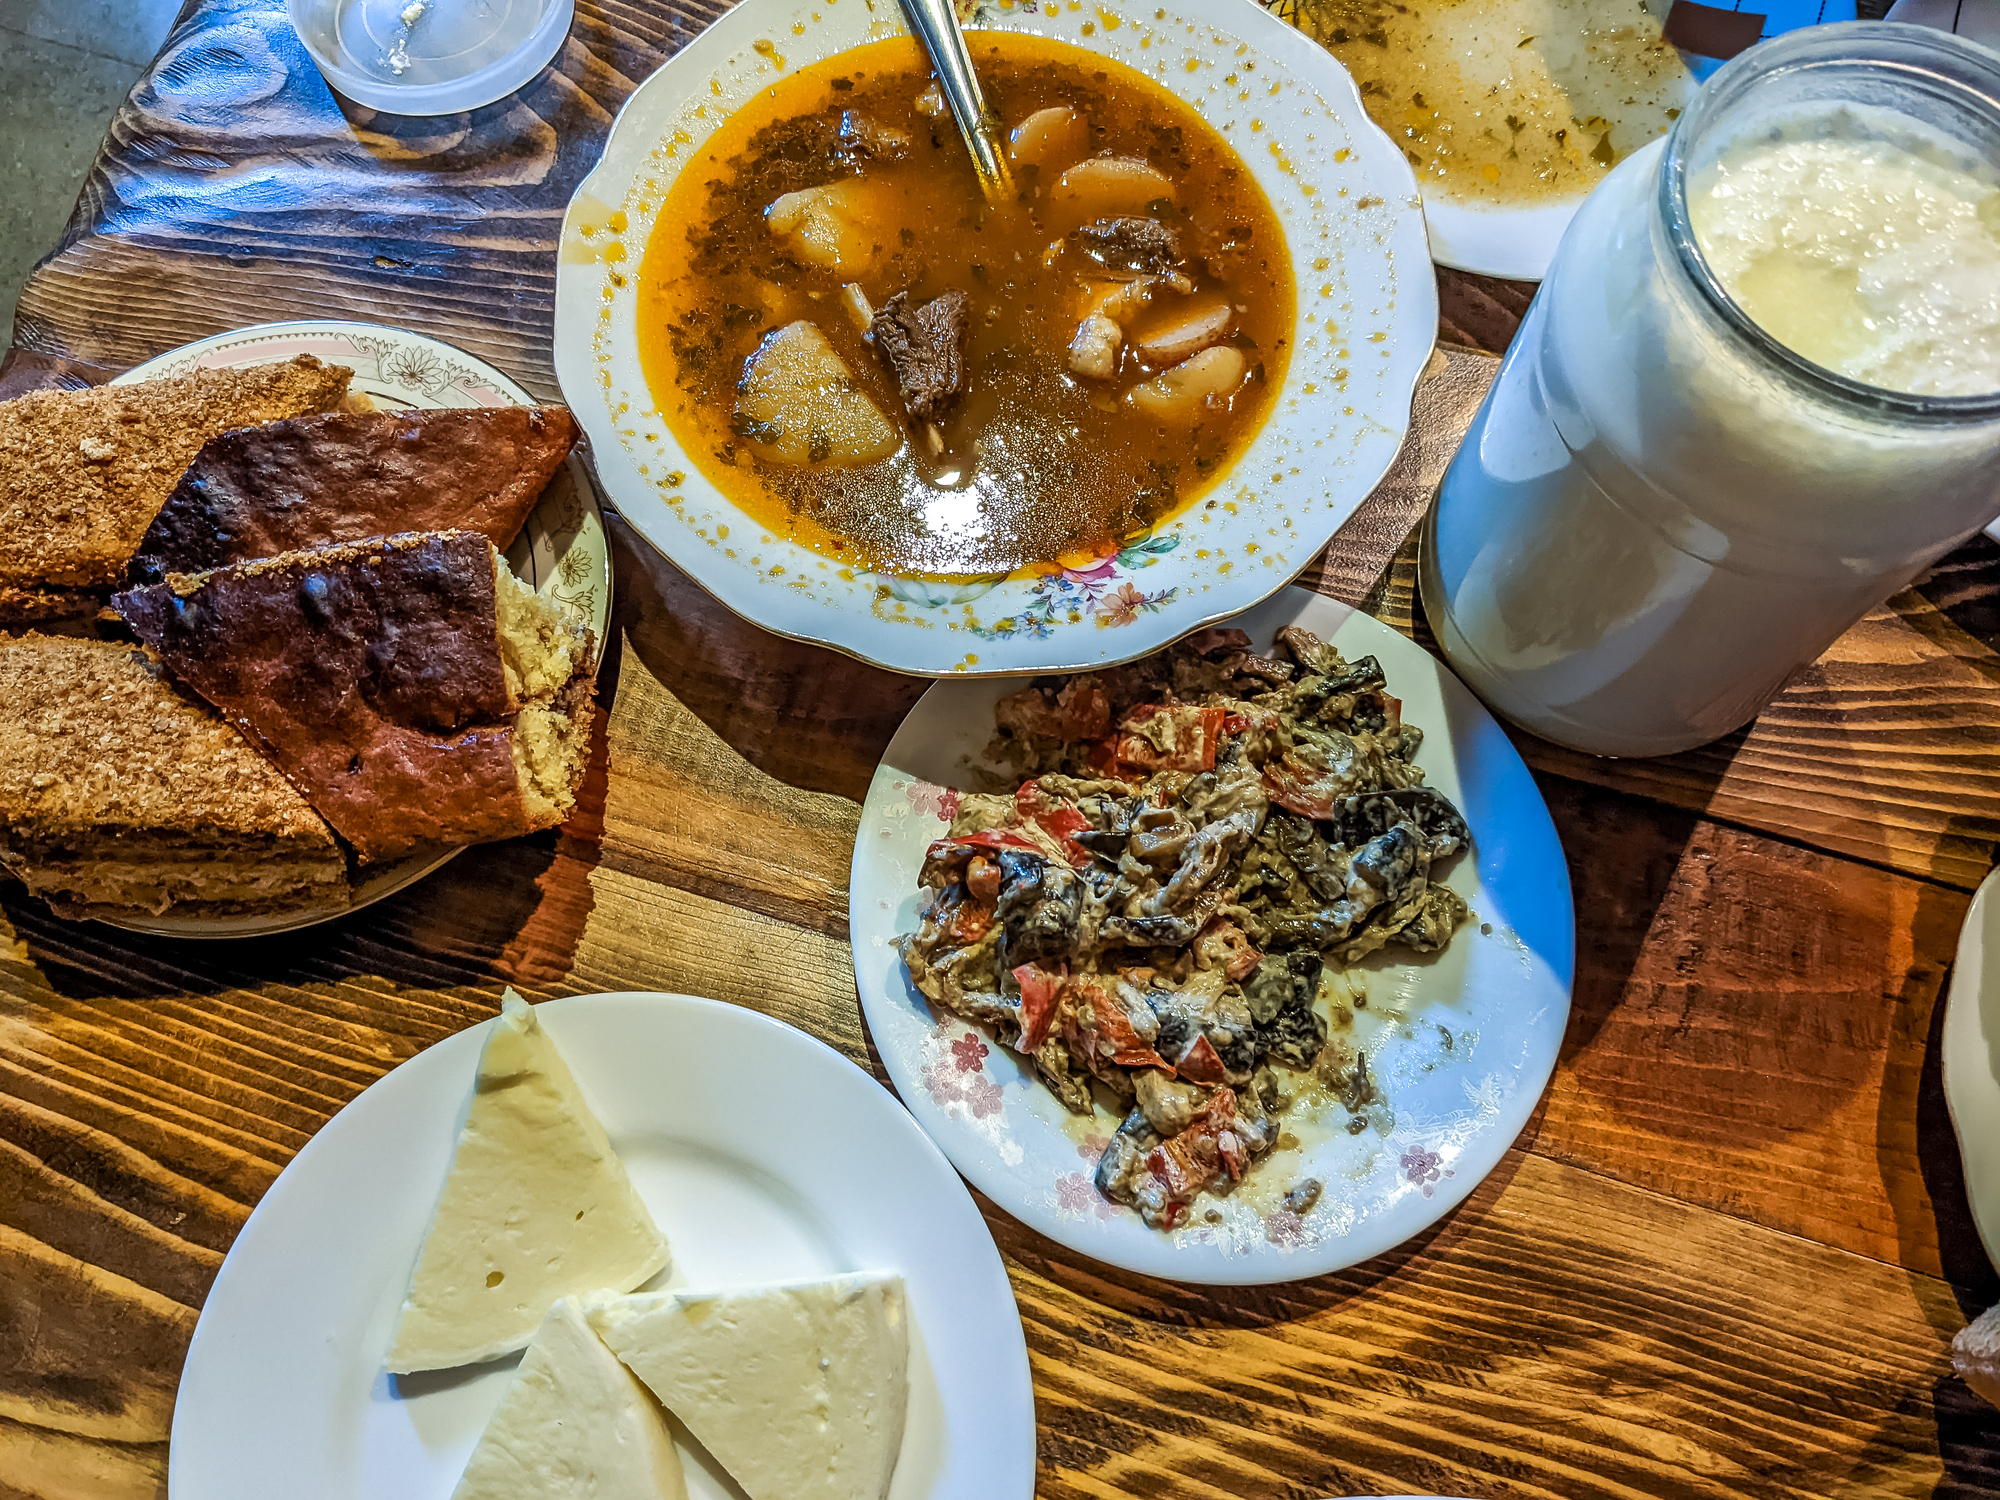 Assorted traditional dishes with soup, bread, cheese, and a beverage on a wooden table